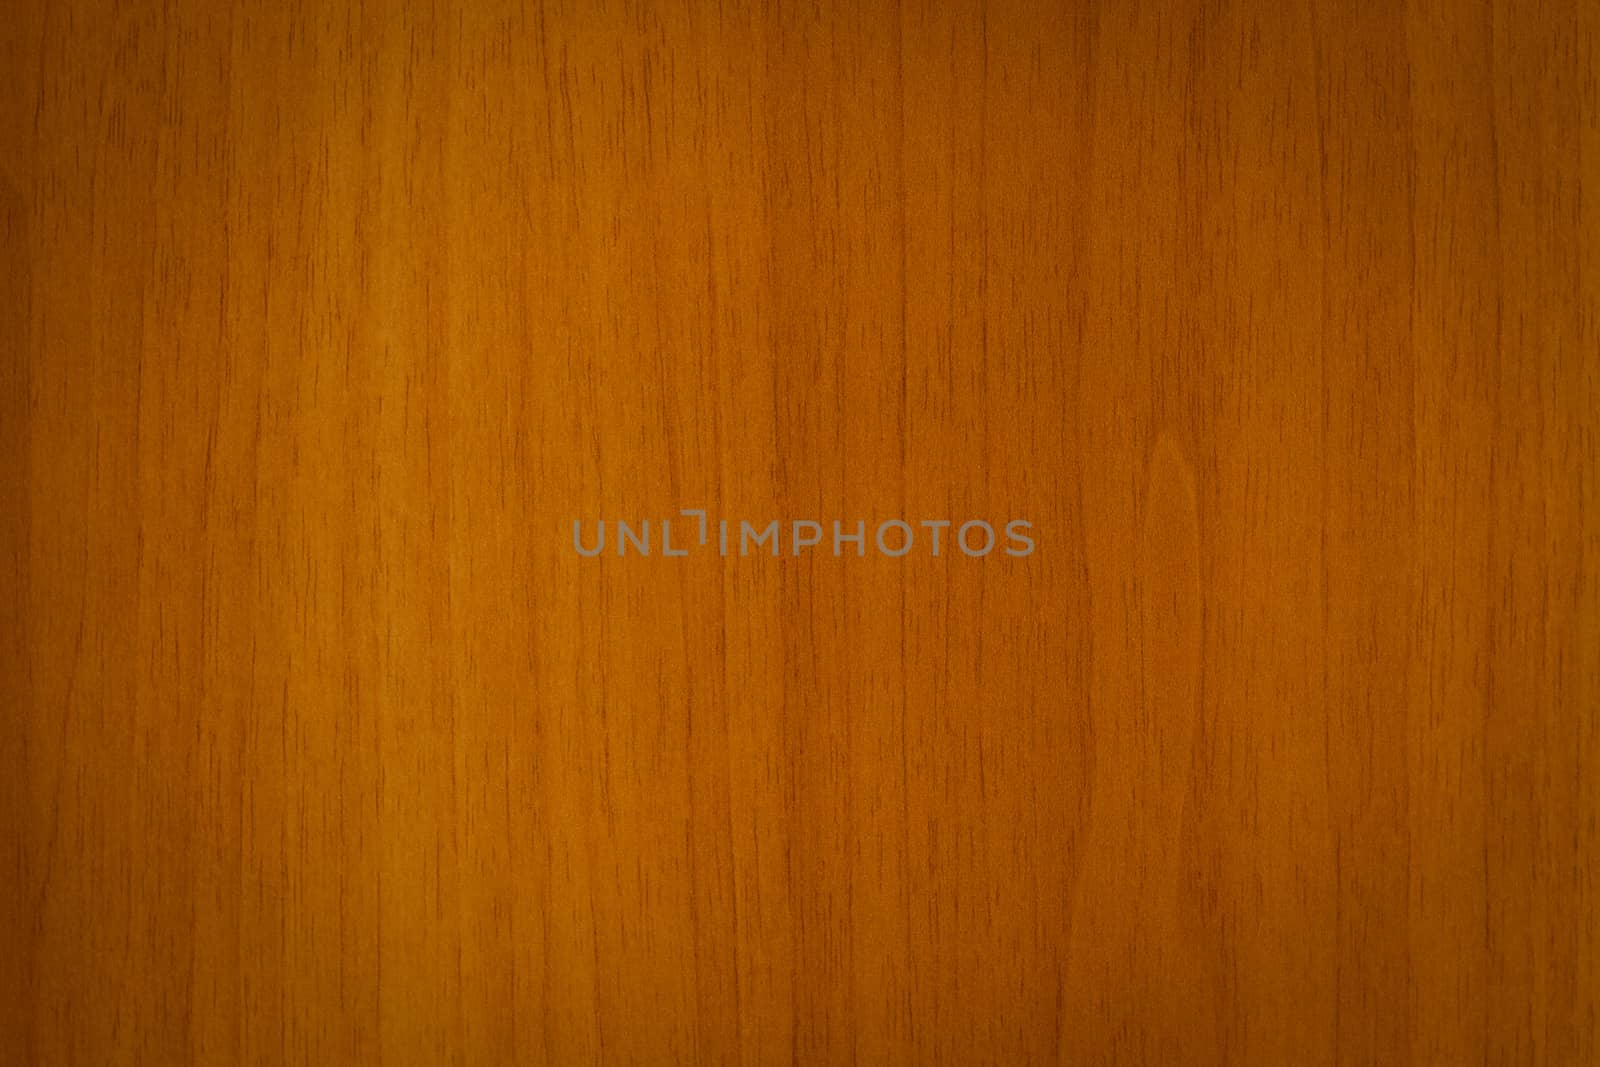 abstract brown wood material surface texture  background